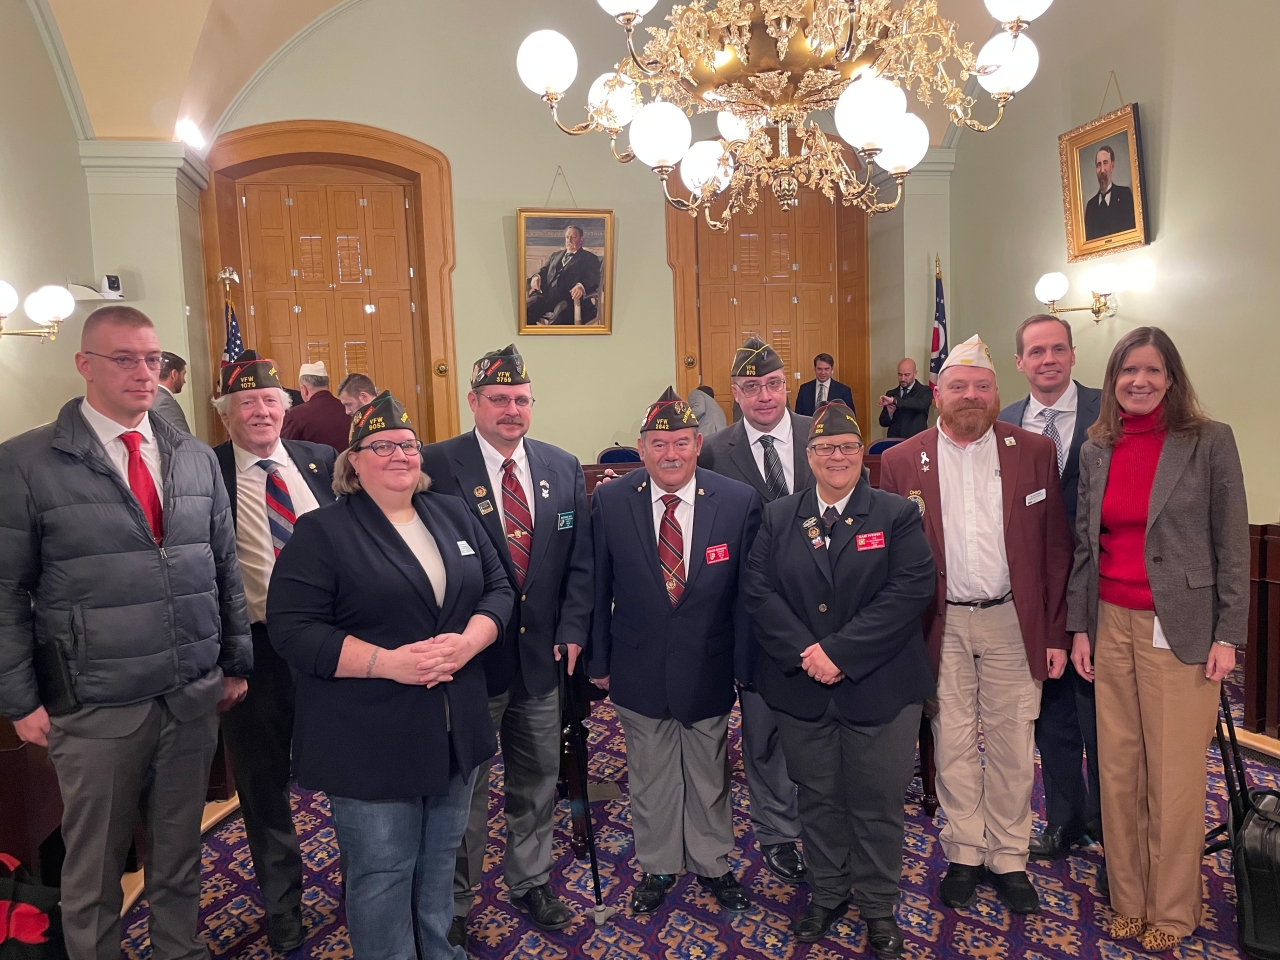 Representative Richardson alongside the many veterans who provided testimony in support of her legislation, H.B. 254. This legislation would provide a 100% property tax exemption to veterans with a 10